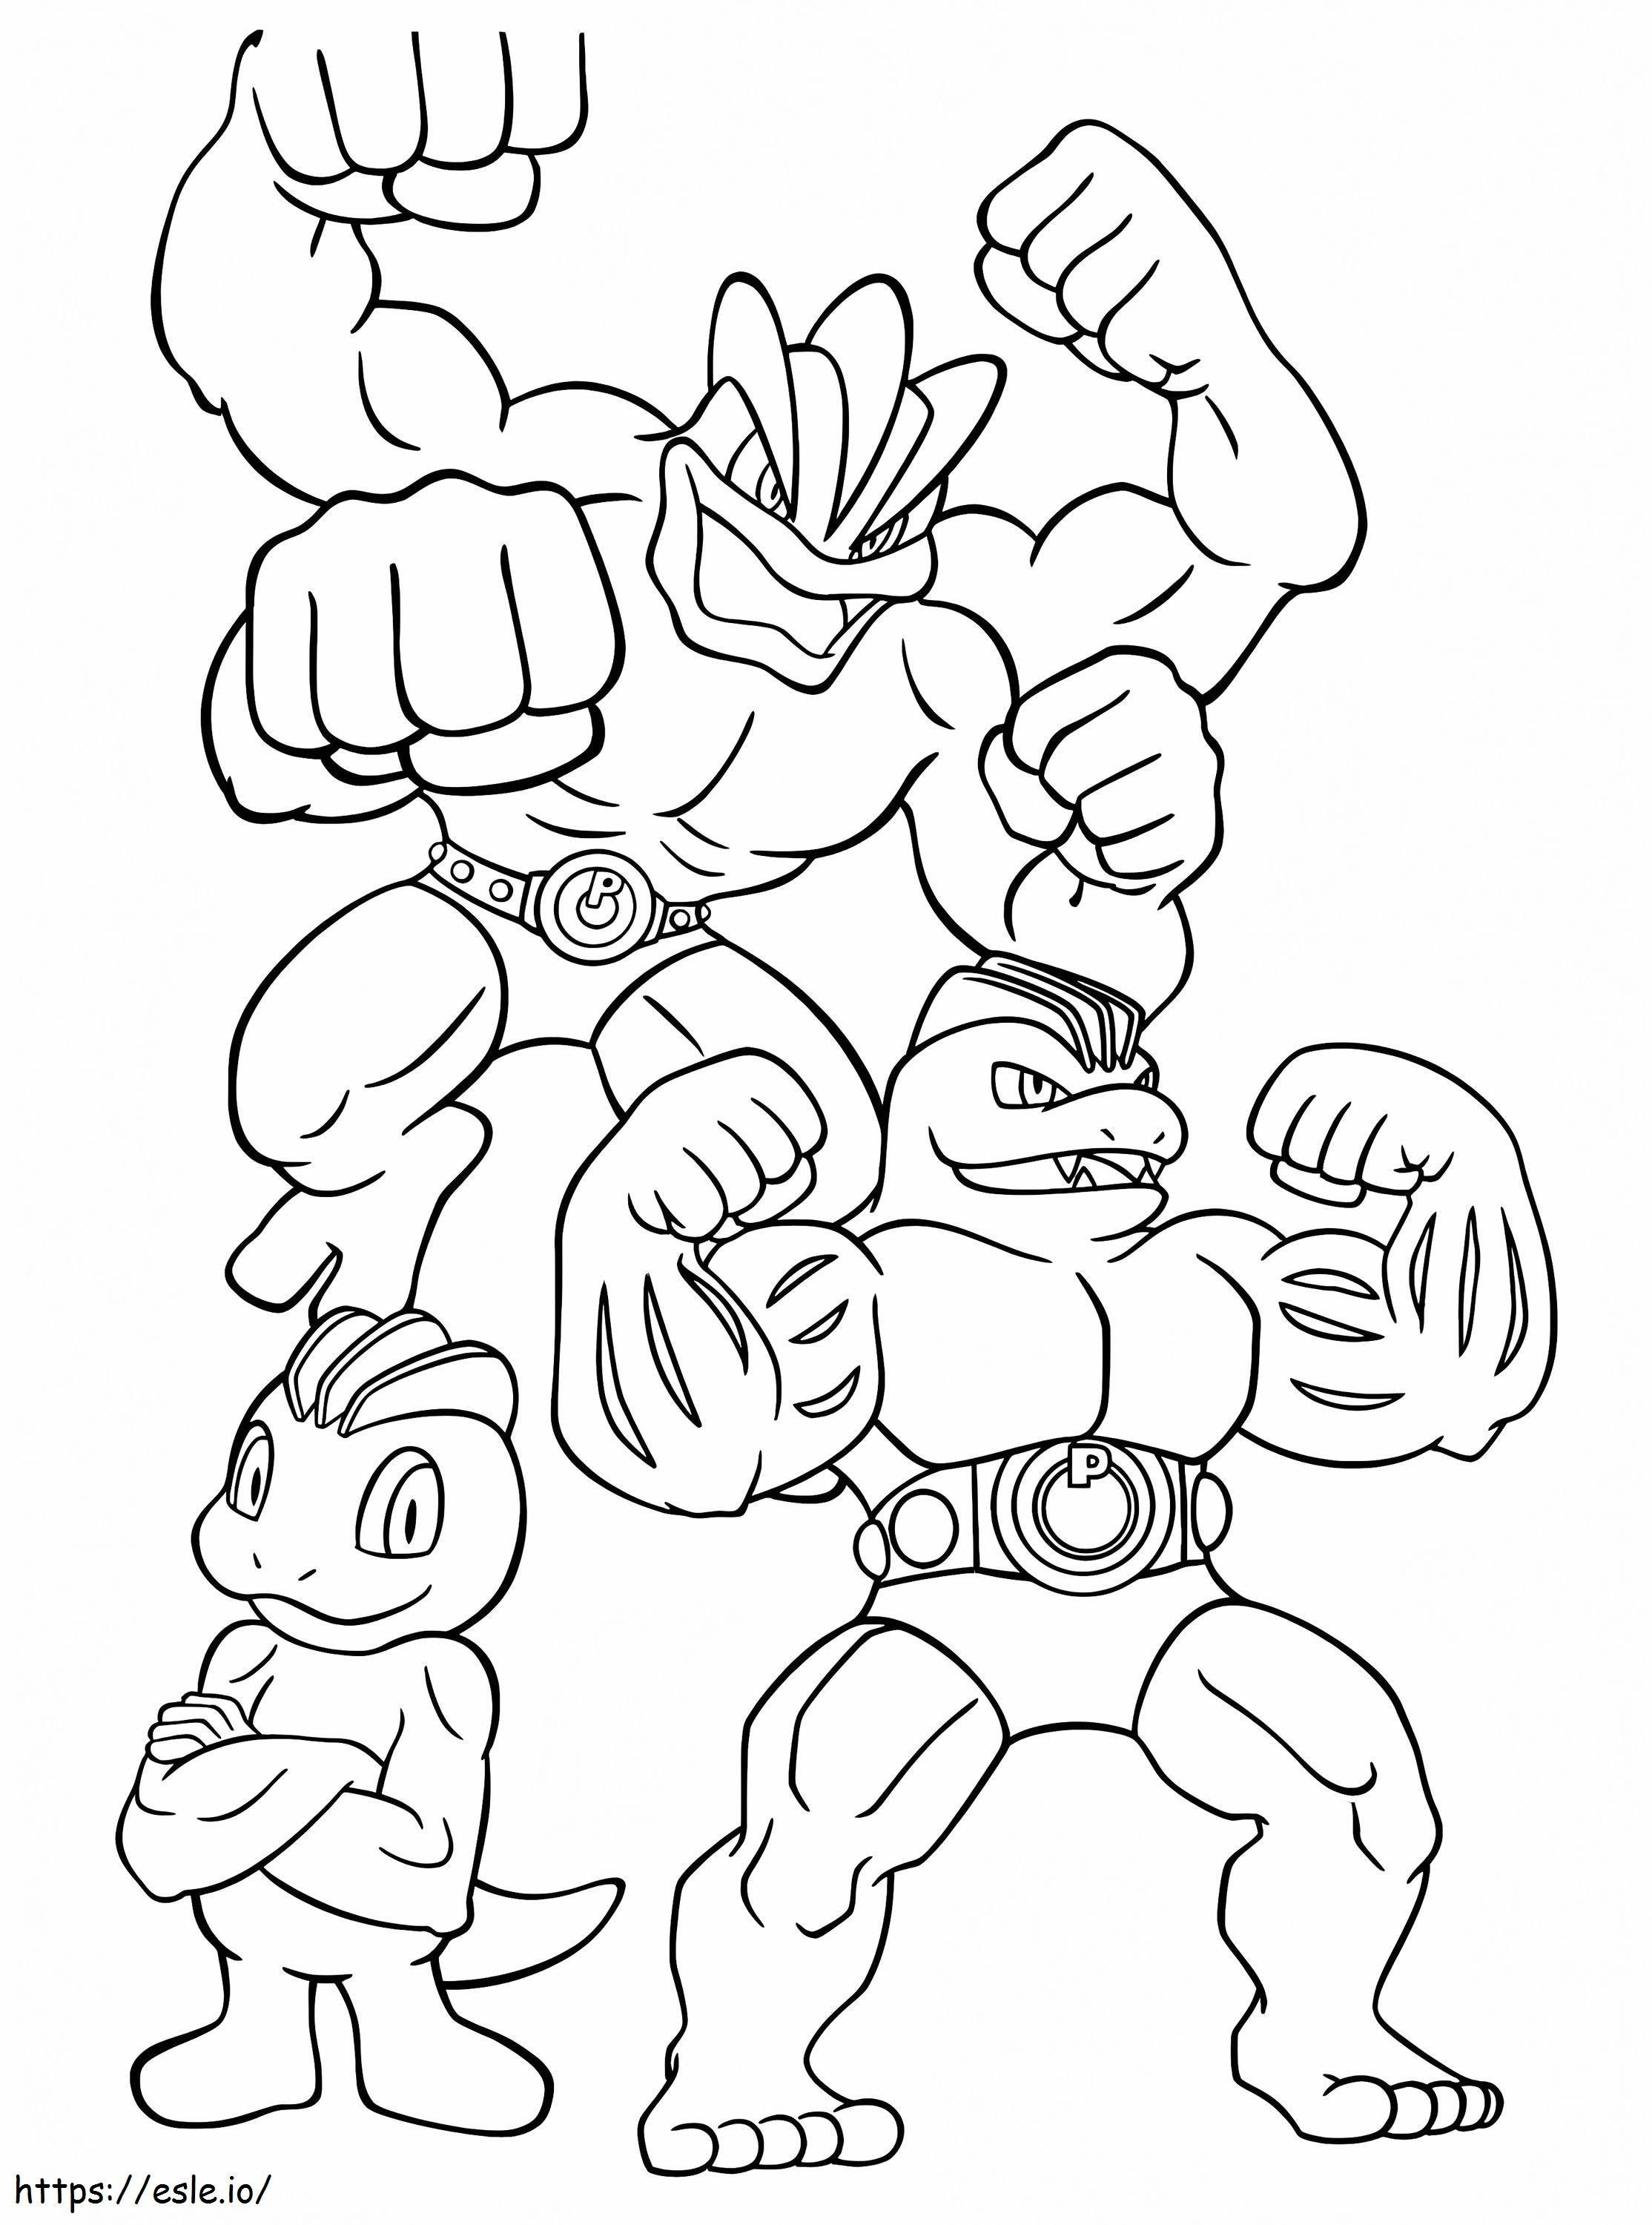 Machamp Evolutions coloring page